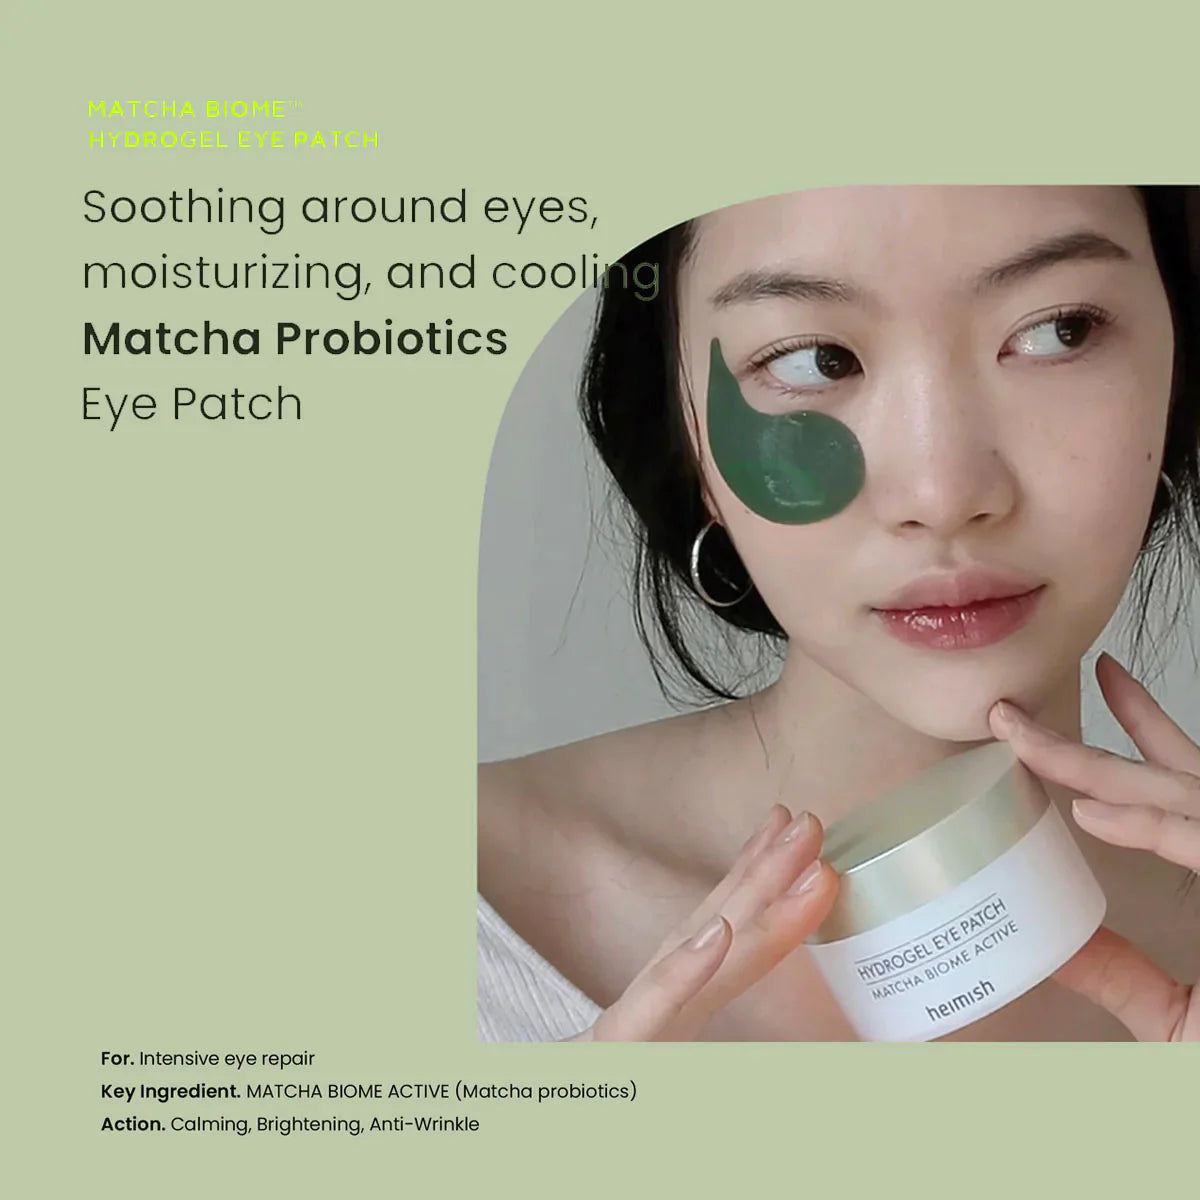 Hydrogel eye patches with matcha extract by Heimish (Heimish Matcha Biome Hydrogel Eye Patch)